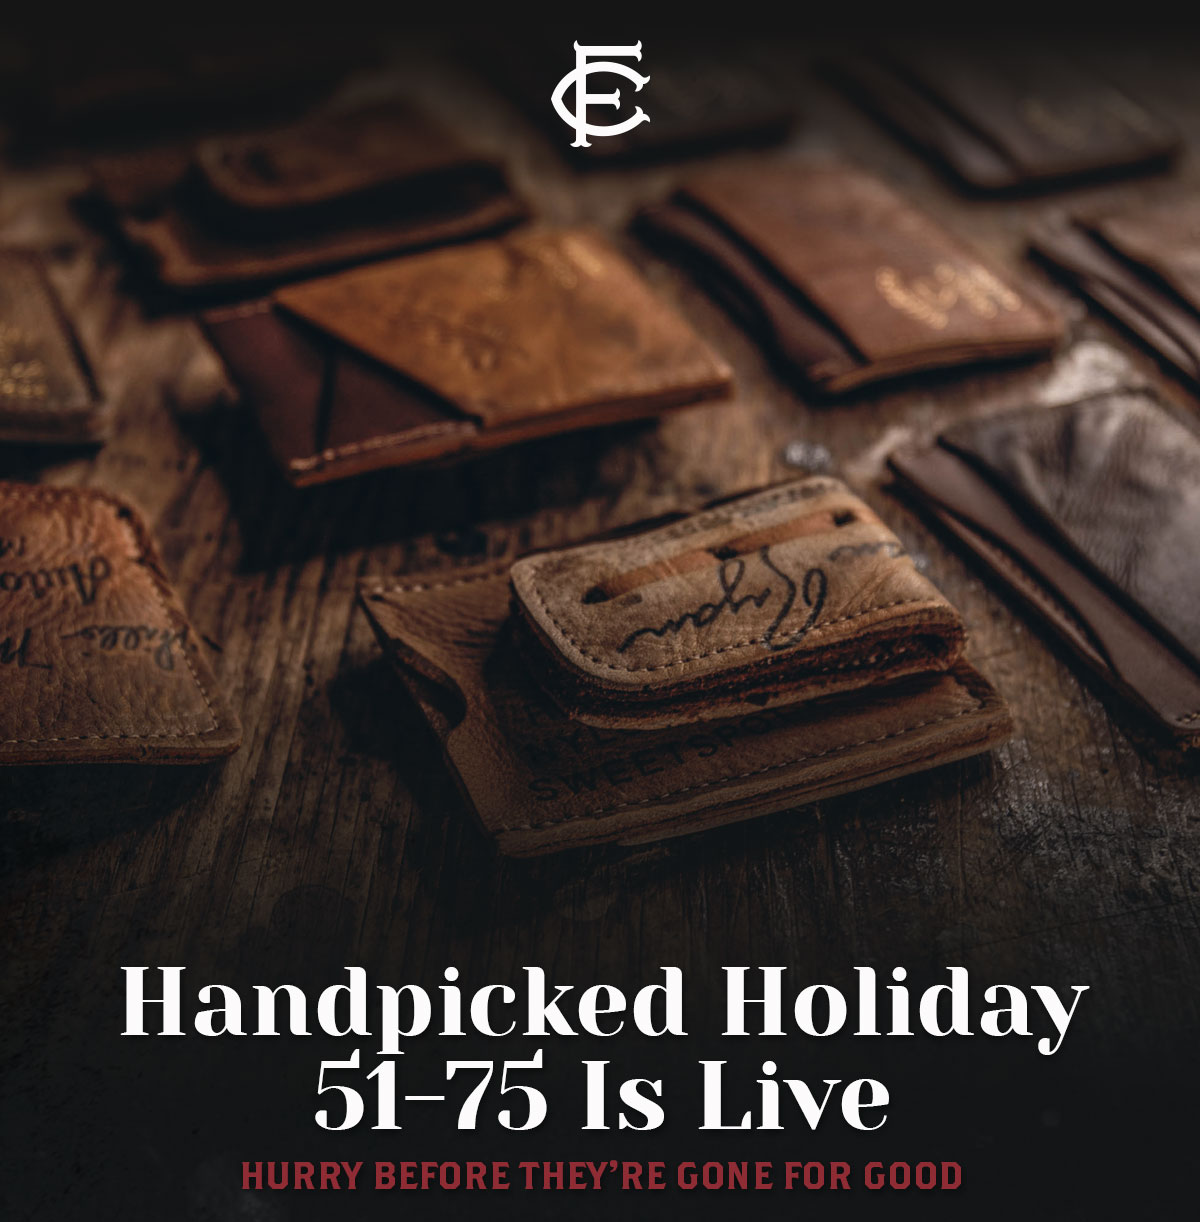 Handpicked Holiday 51-75 Is Live